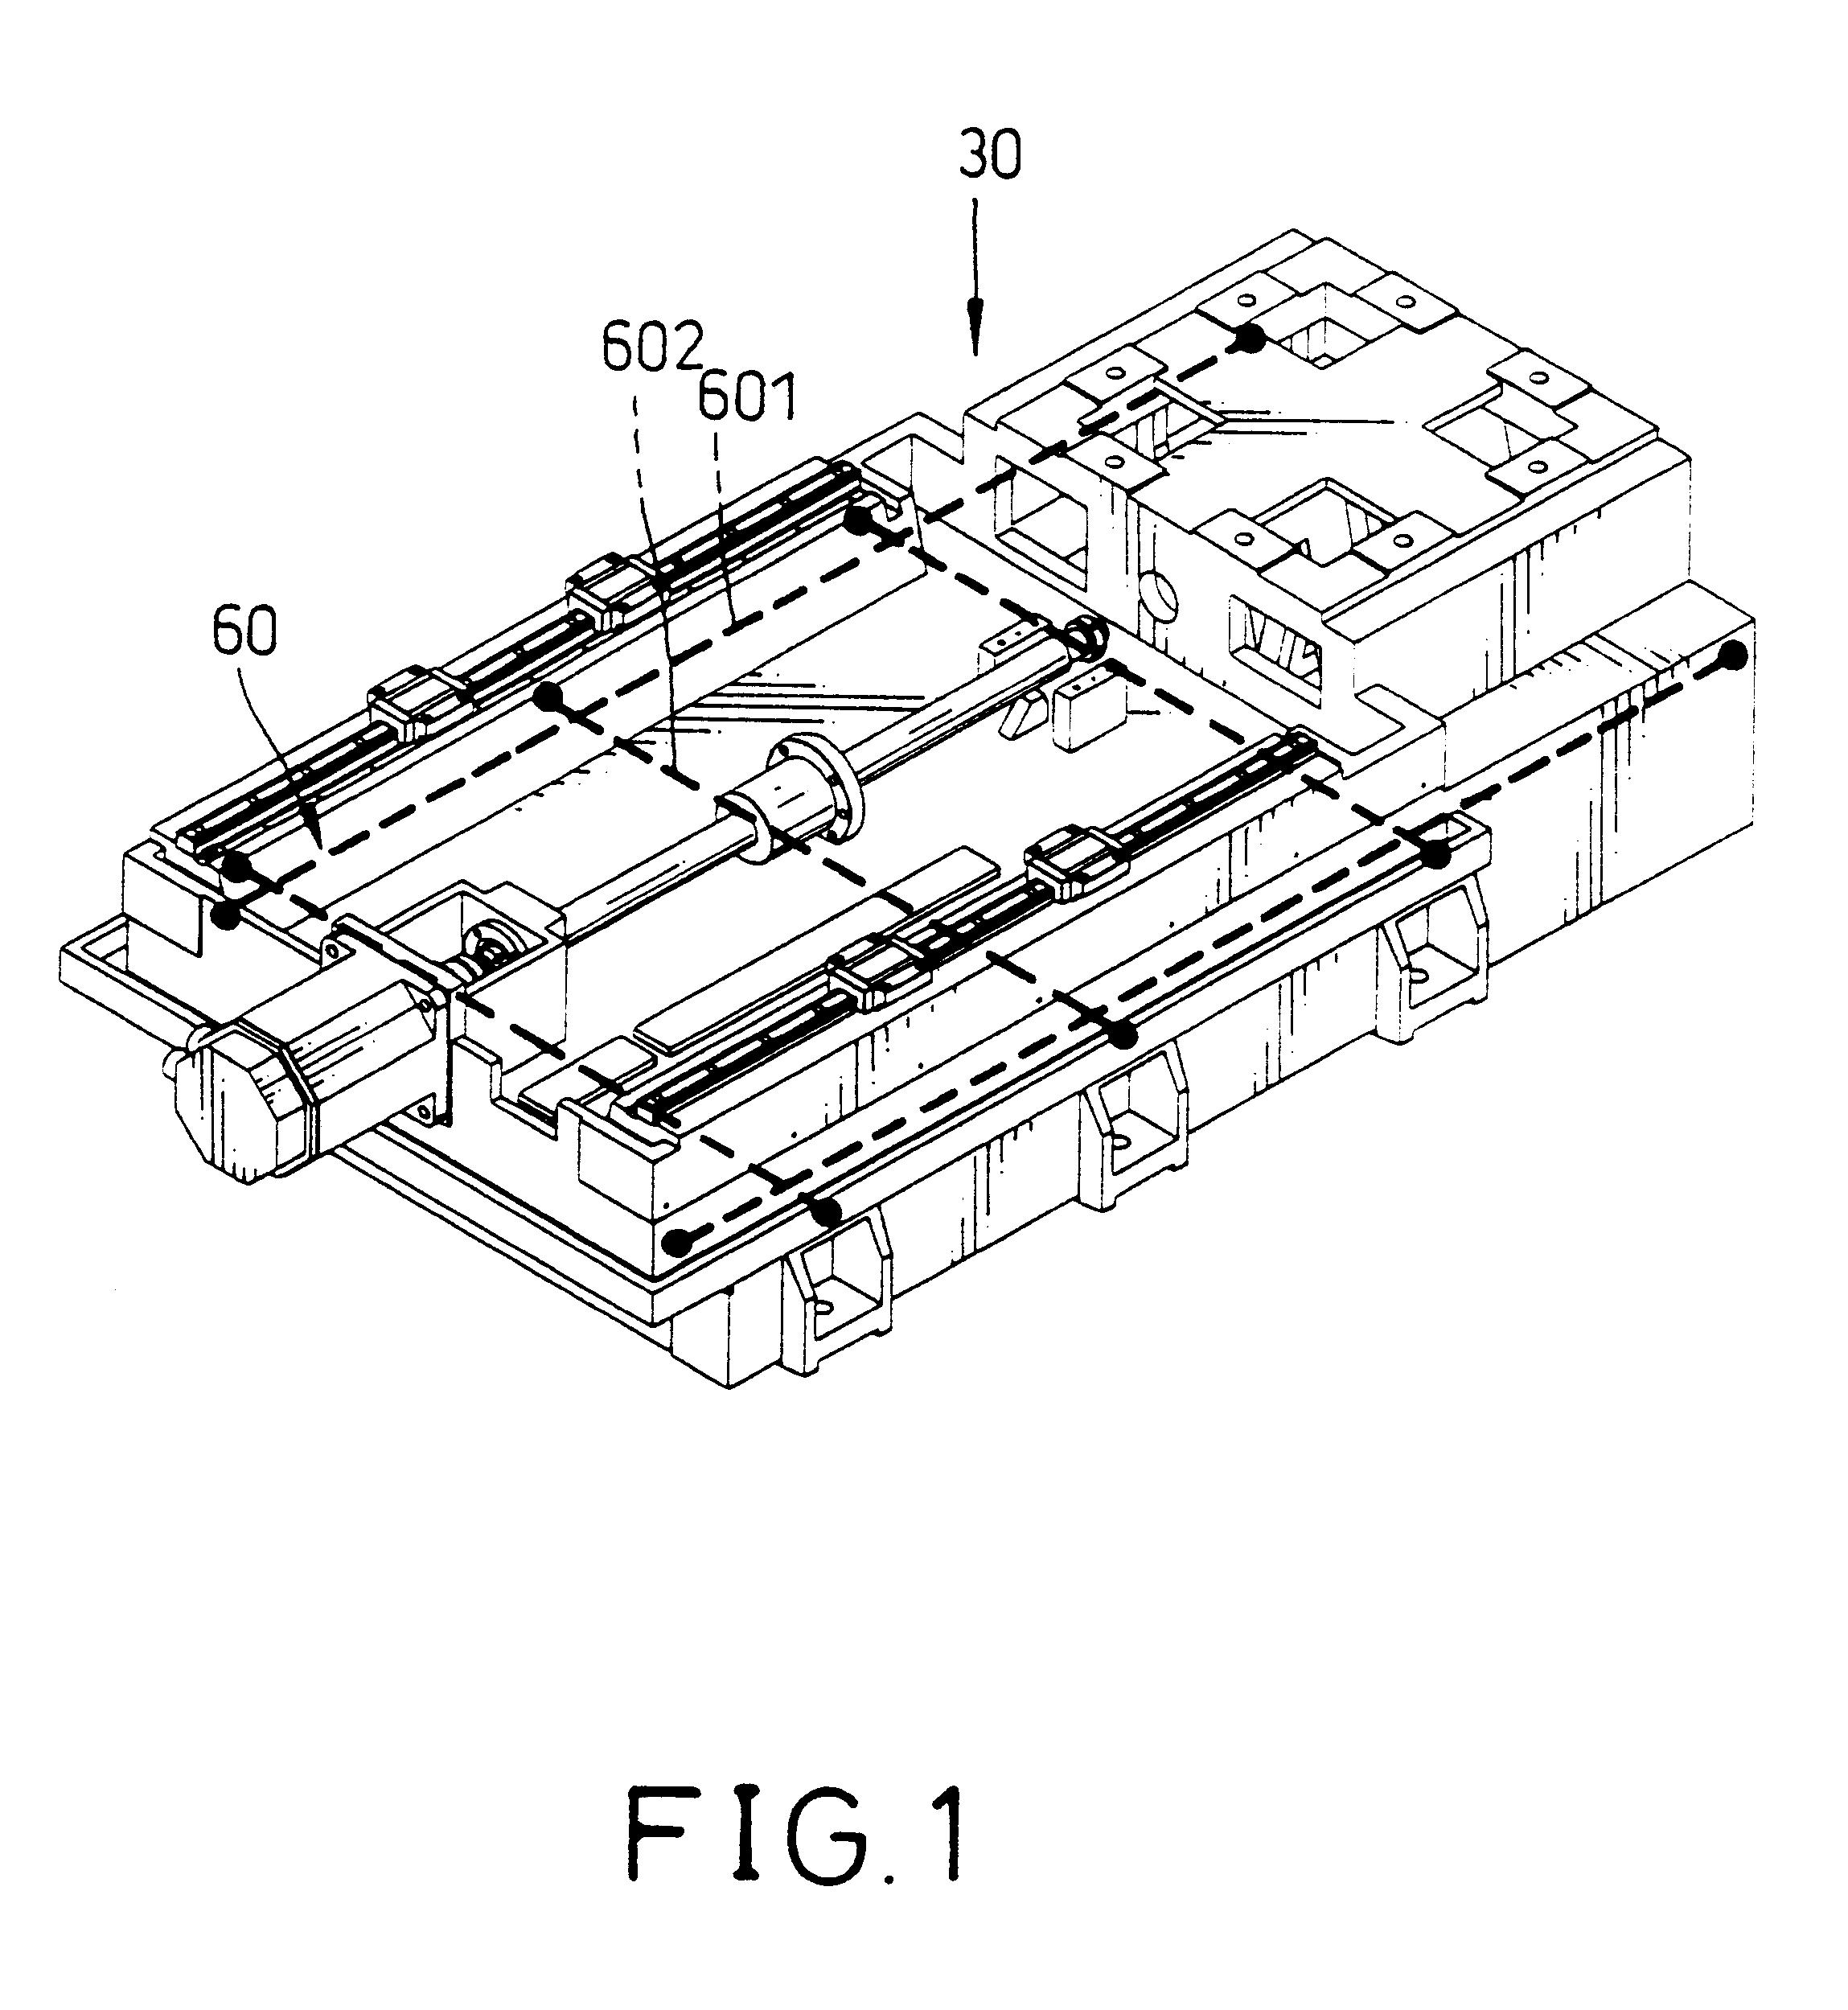 Prestressing device for a mechanical finishing device